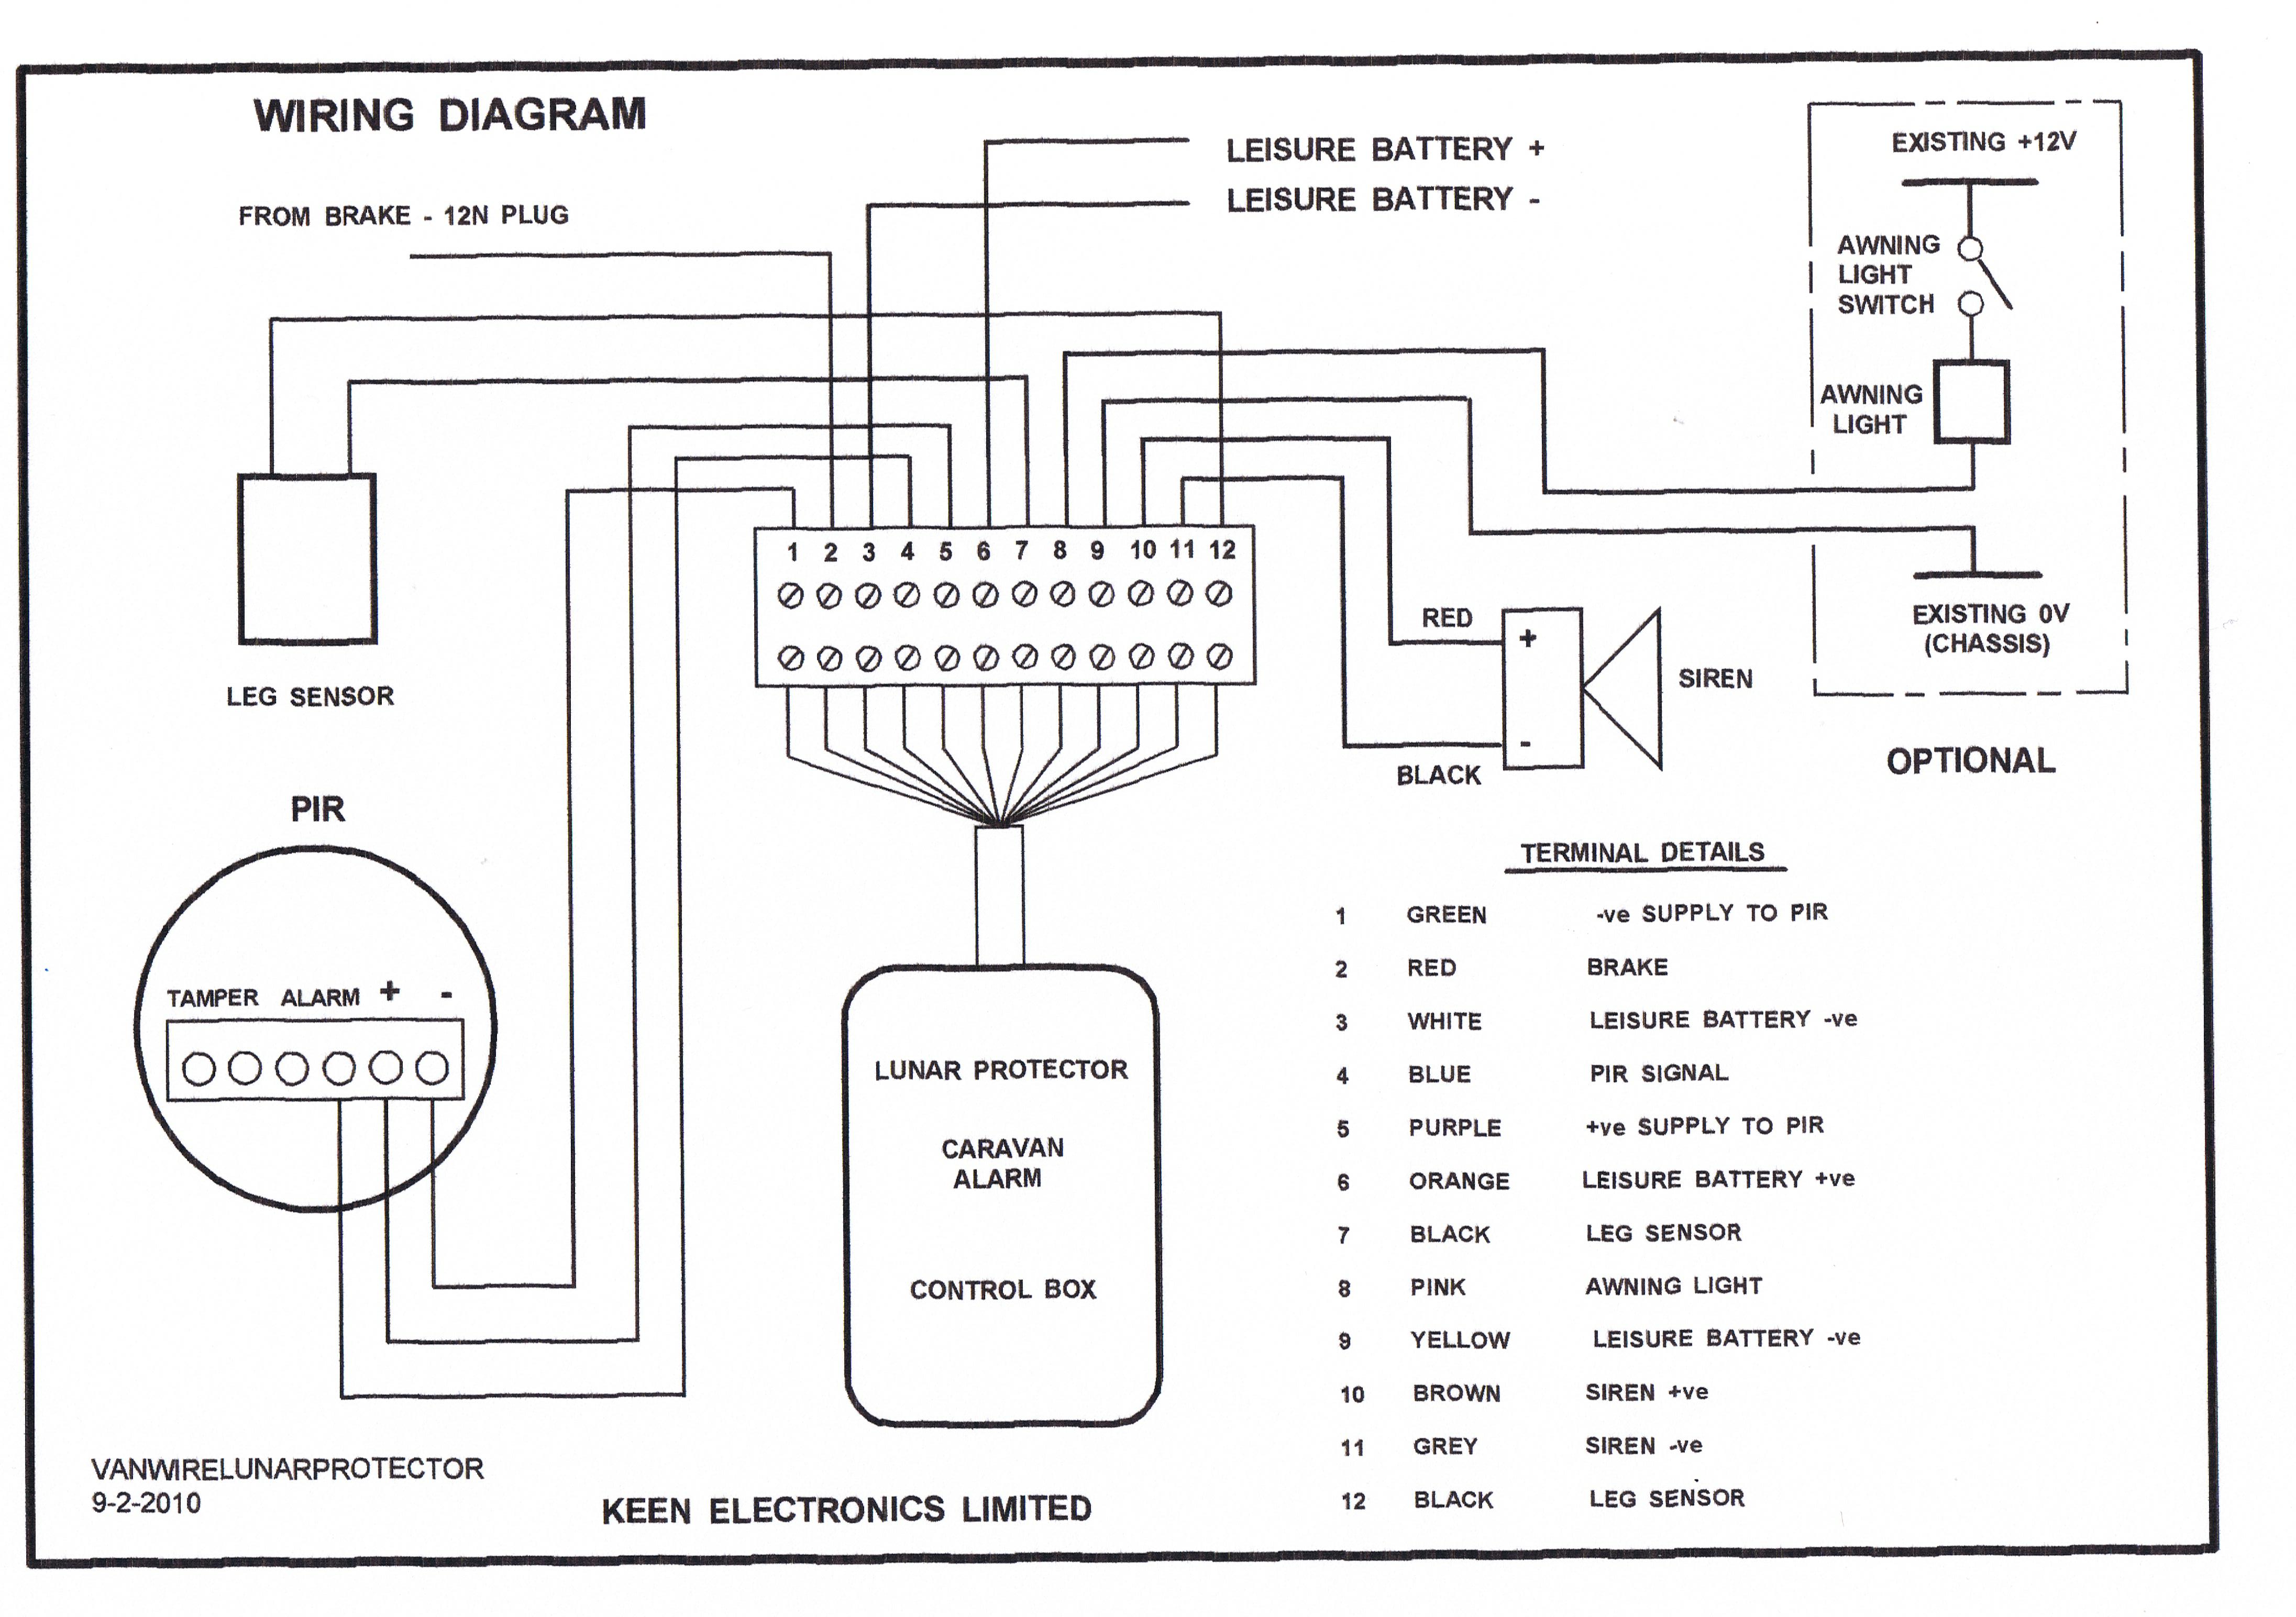 Security System Wiring Diagram from www.caravanguard.co.uk